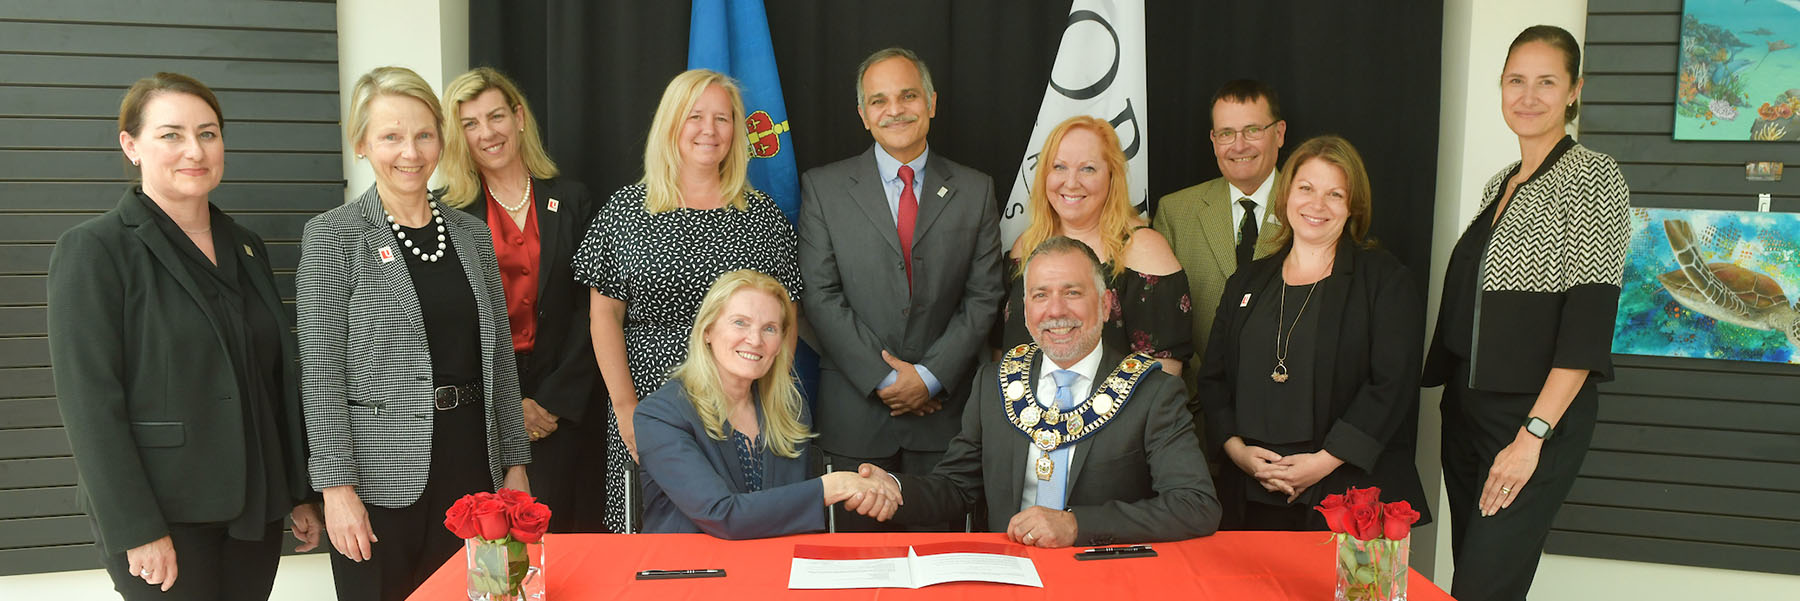 MOU signing between York University and Aurora on June 20